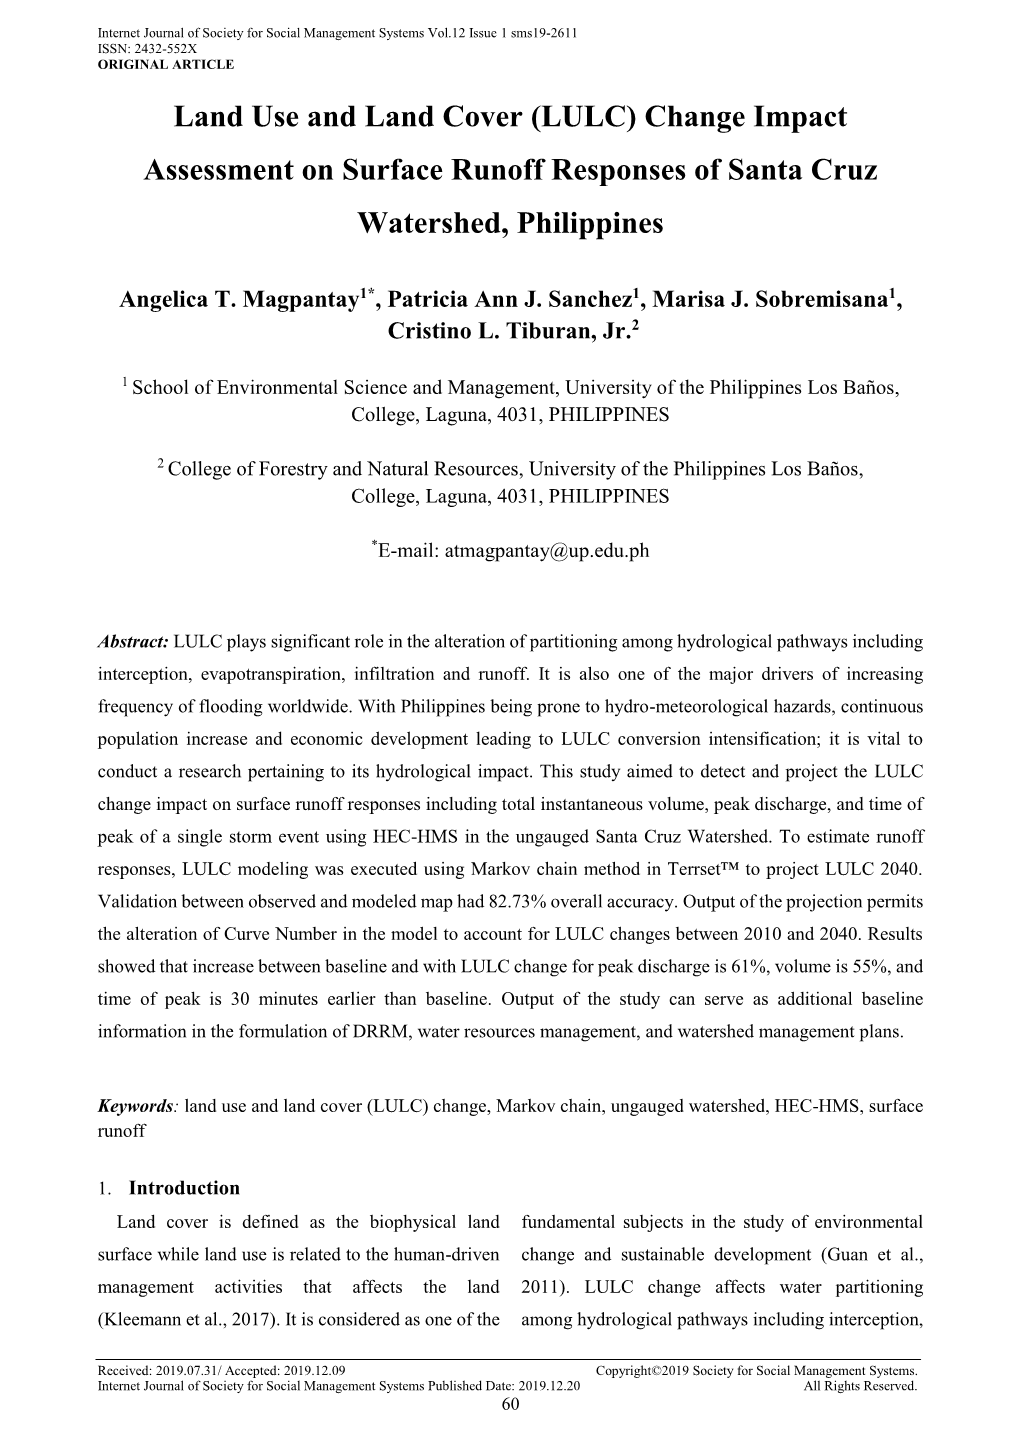 Land Use and Land Cover (LULC) Change Impact Assessment on Surface Runoff Responses of Santa Cruz Watershed, Philippines